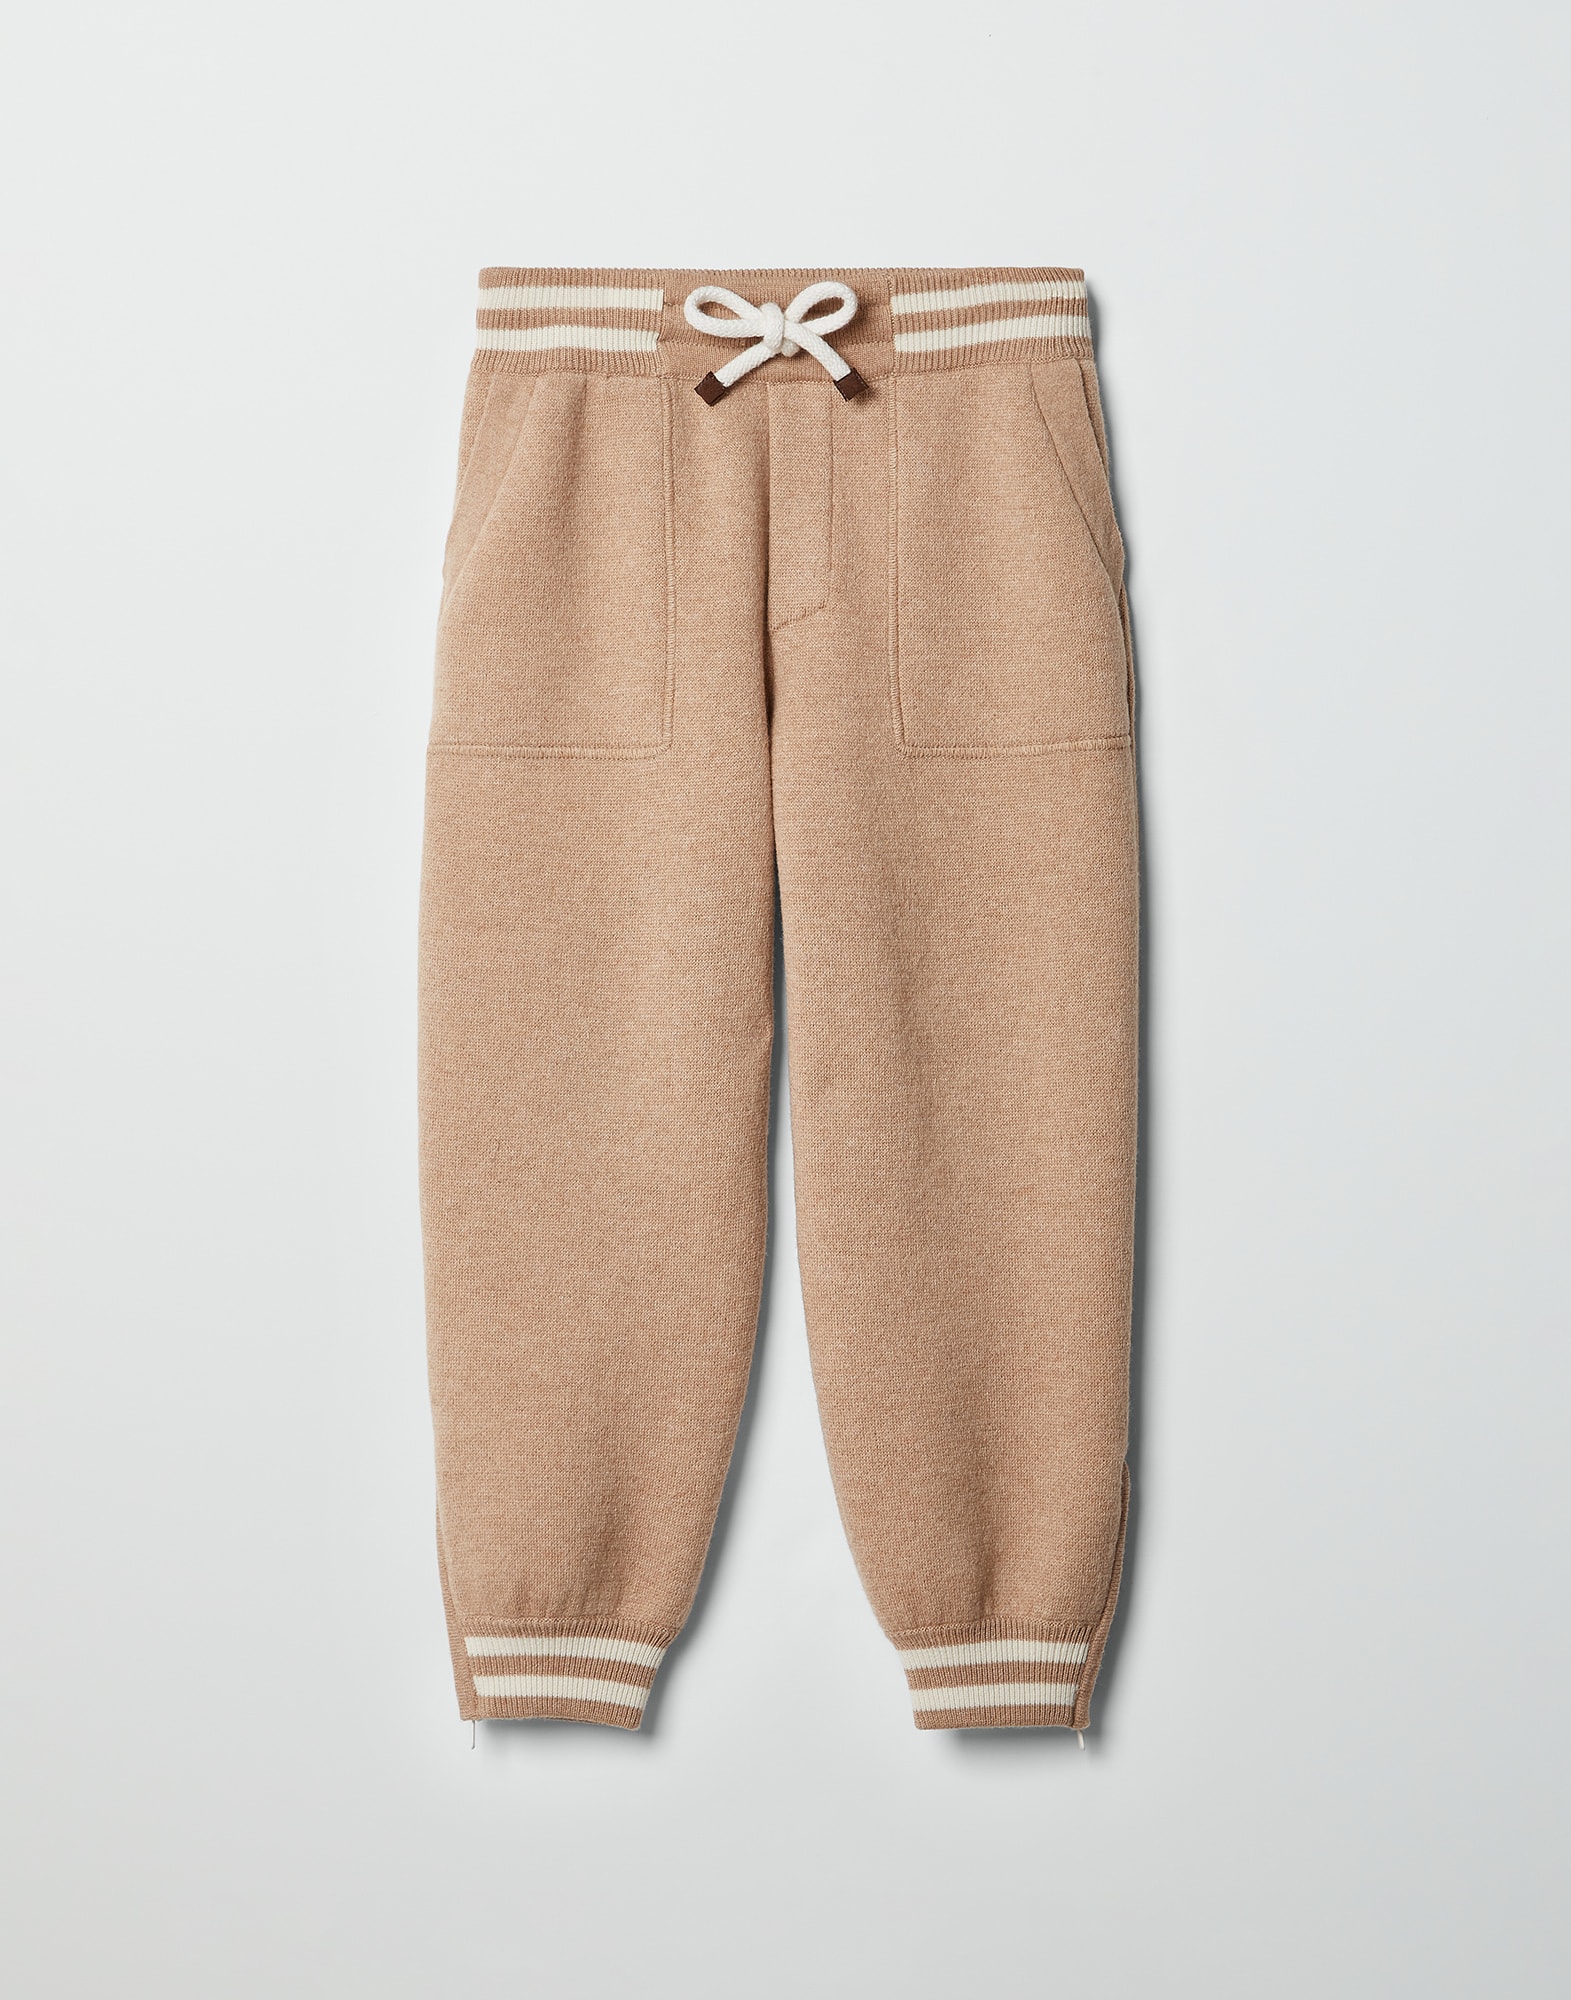 Double knit trousers